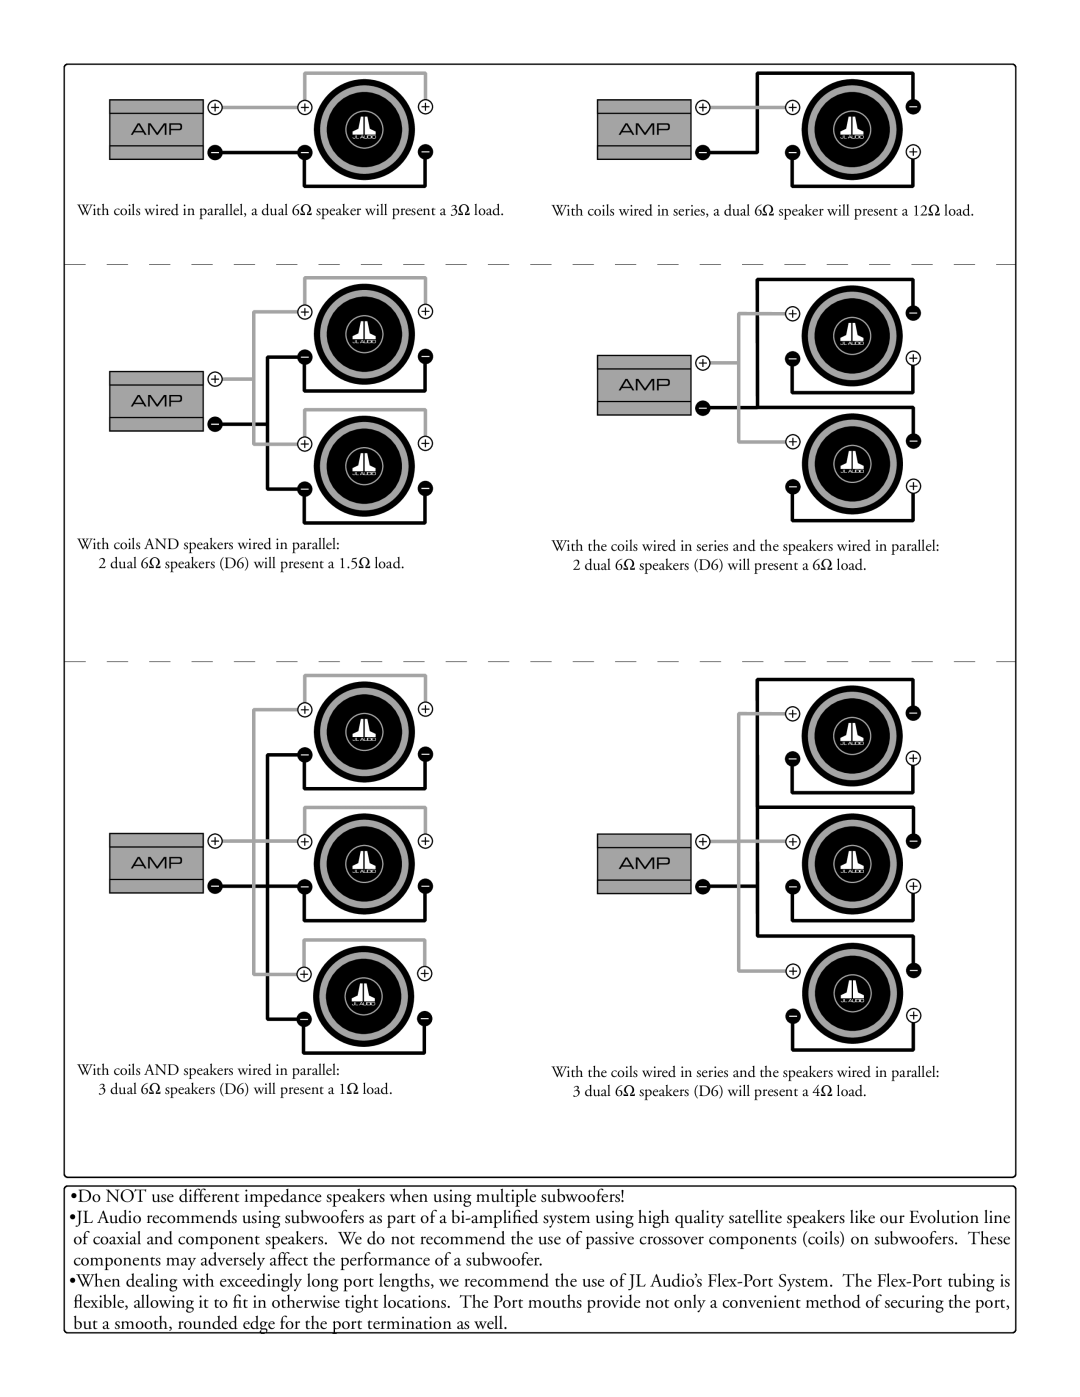 JL Audio 18W6 dimensions With coils AND speakers wired in parallel 